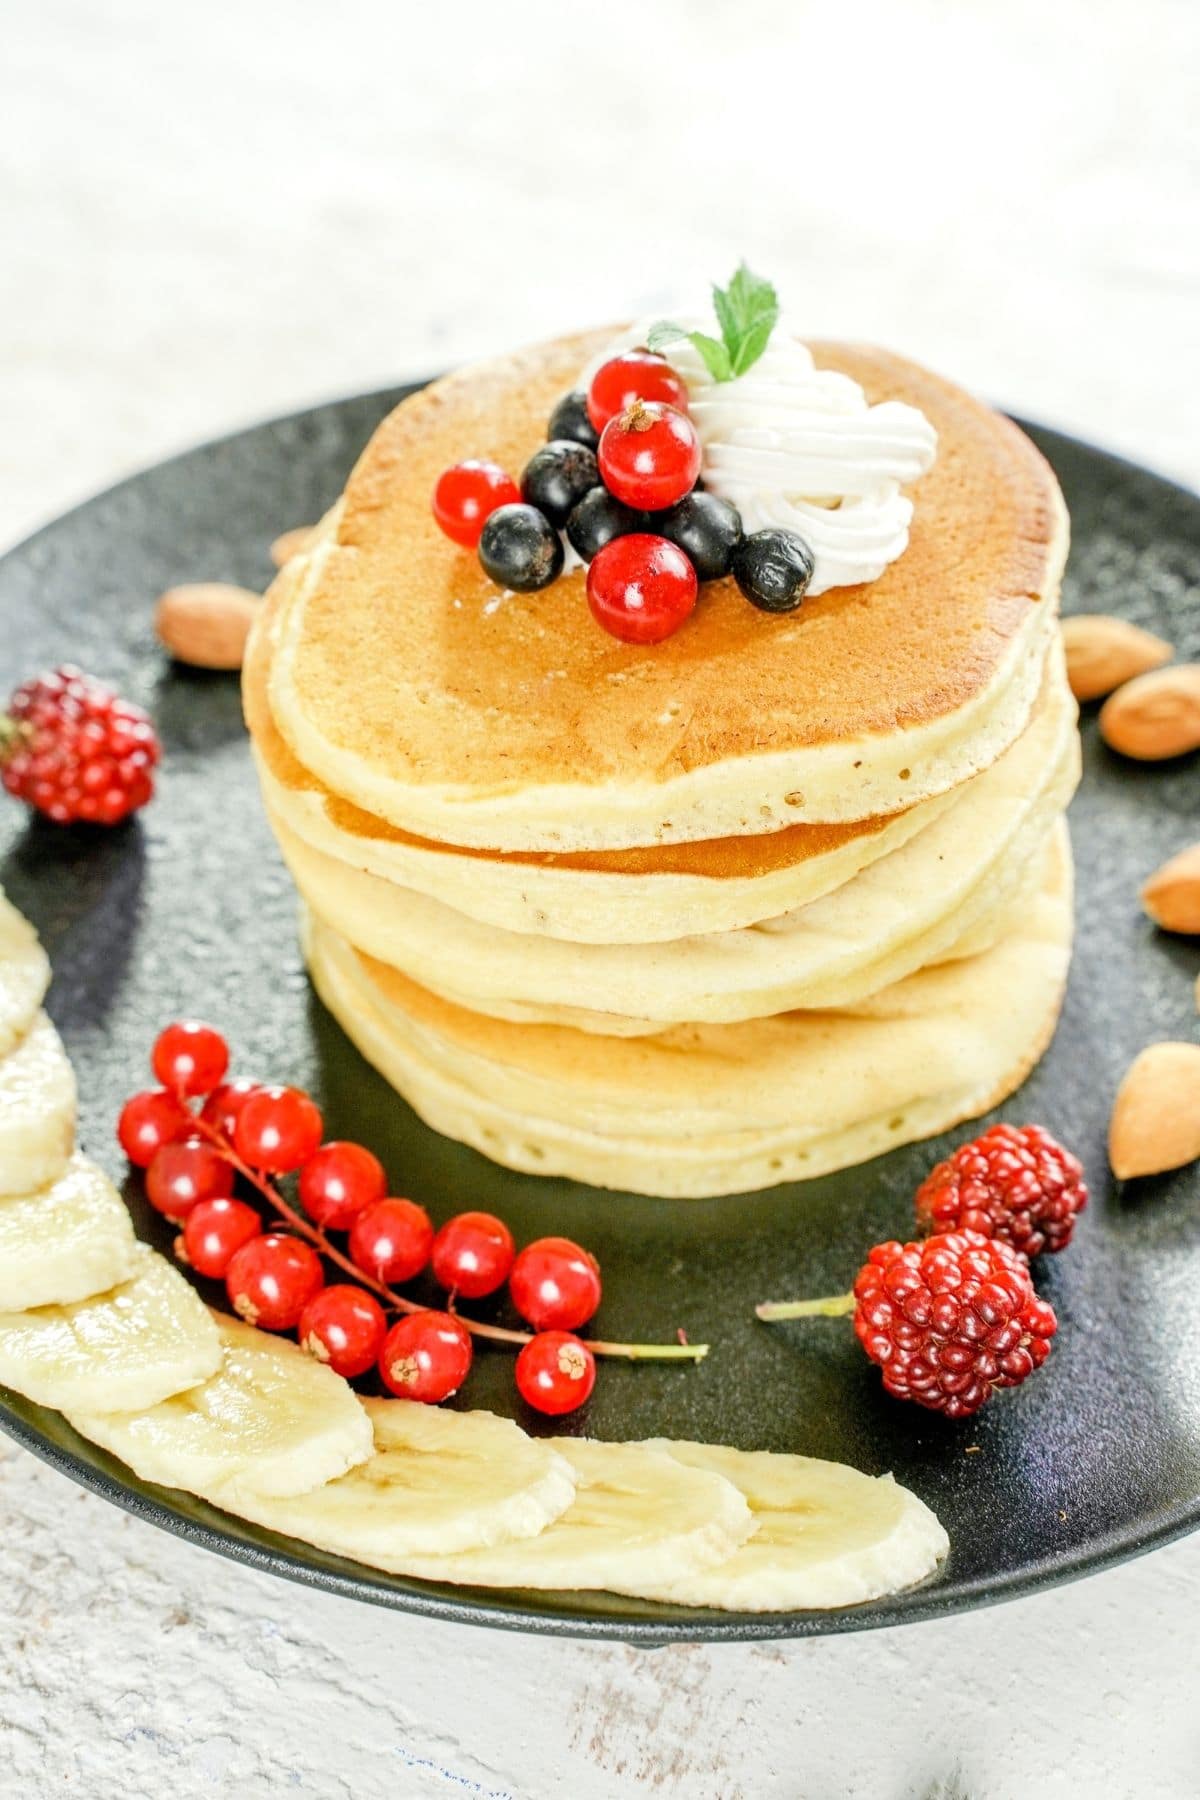 pancakes stacked on plate with berries and banana slices